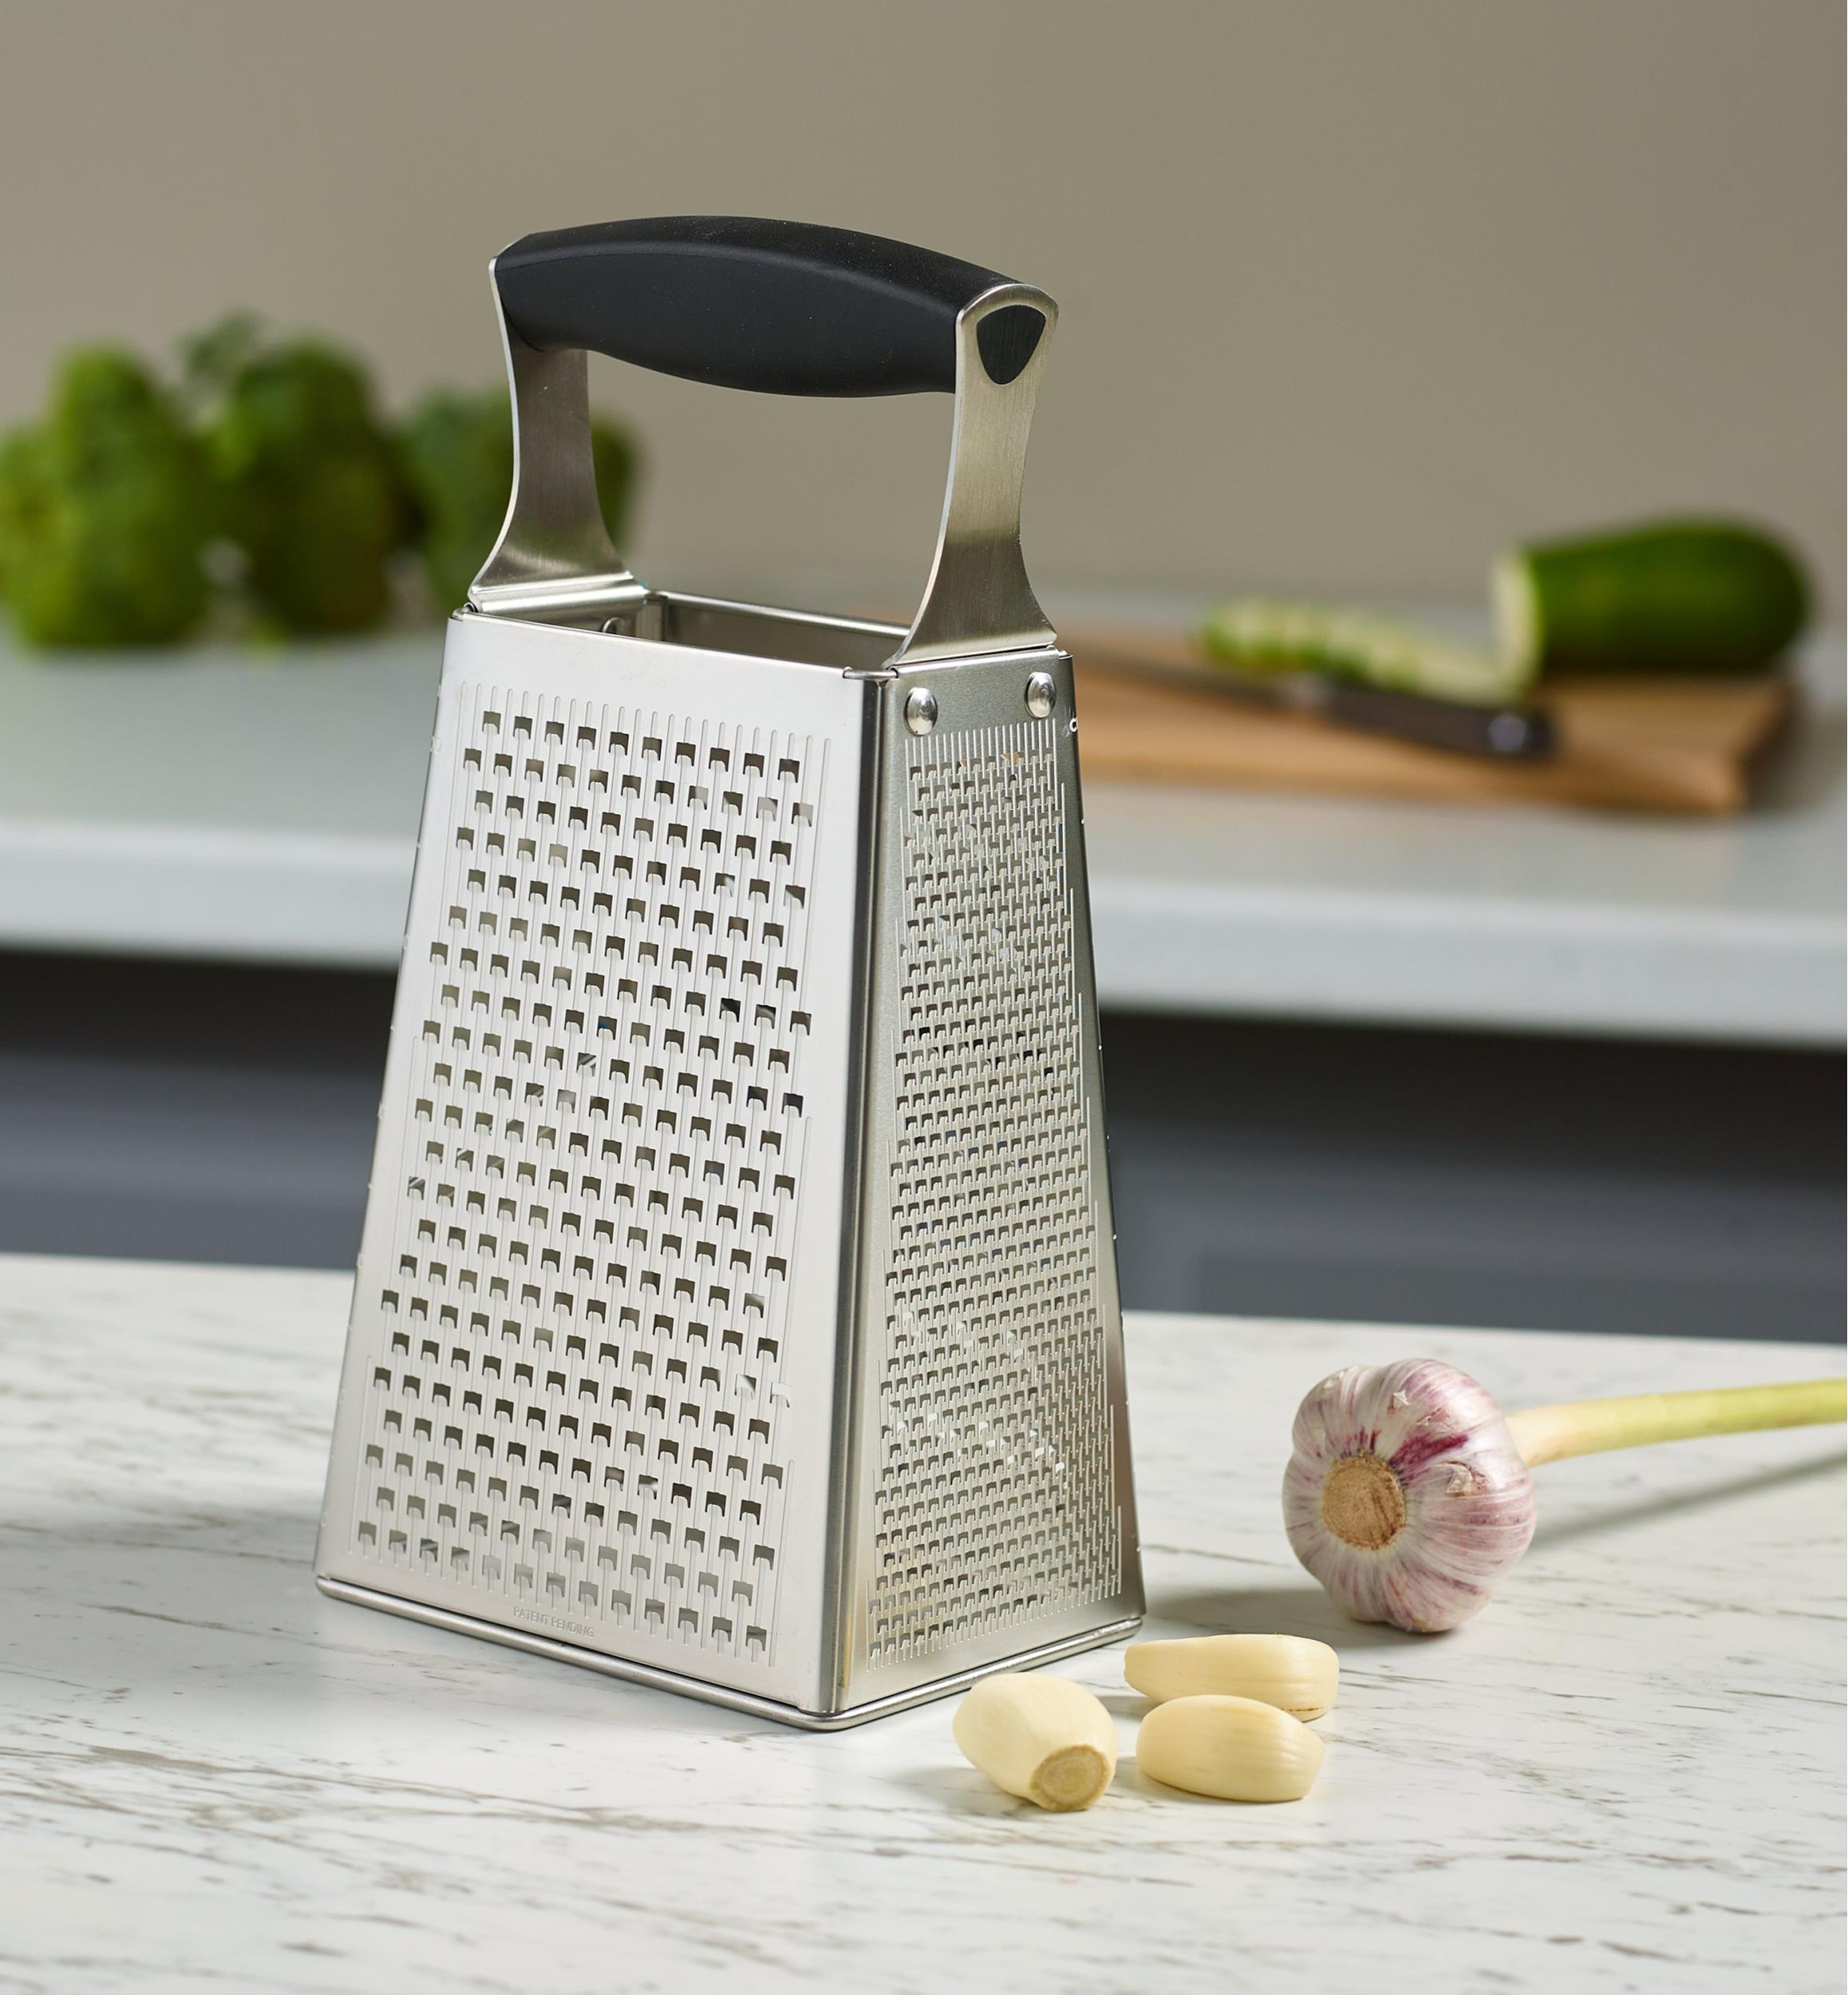 Unique Ways To Use Your Box Grater